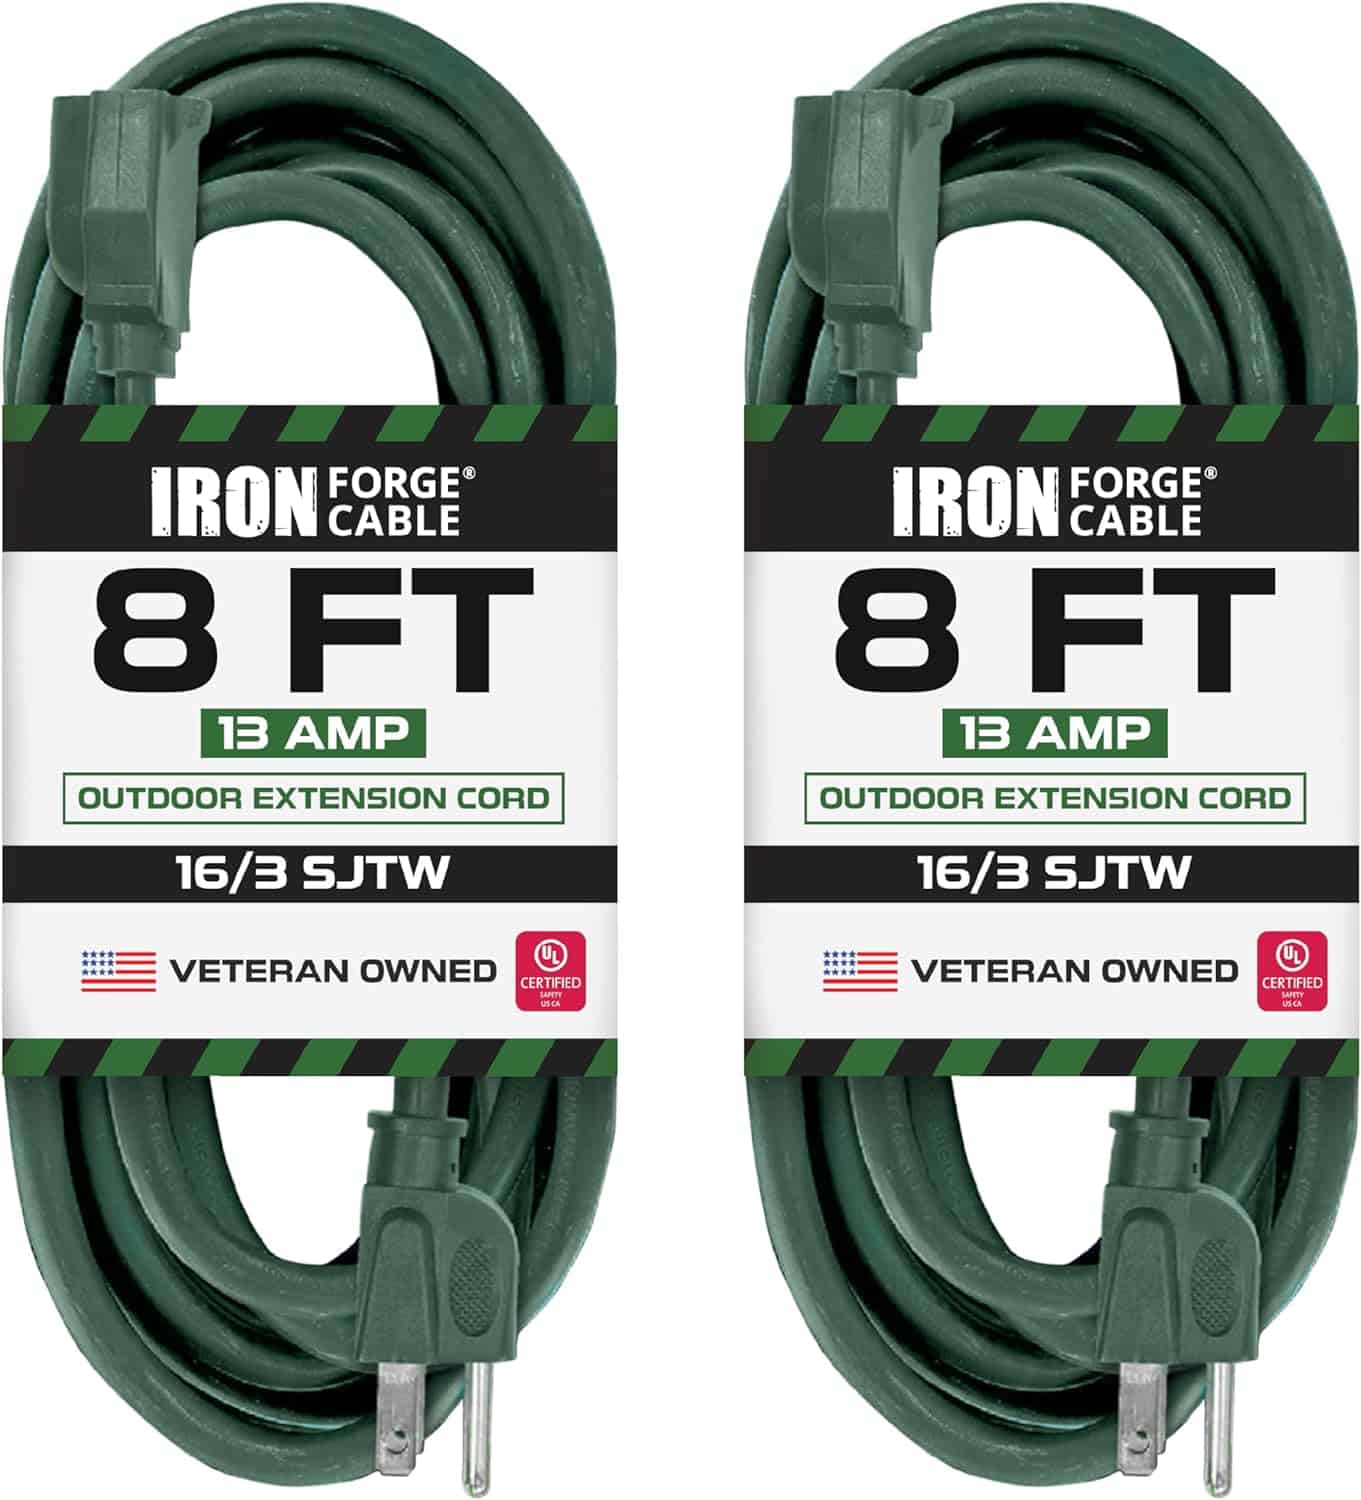 Irong-Forge-Cable-8-Foot-Green-Outdoor-Extension-Cord-2-Pack-16-3-Indoor-Outdoor-Use-3-Prong-Weatherproof-Exterior-Great-for-Garden-Landscaping